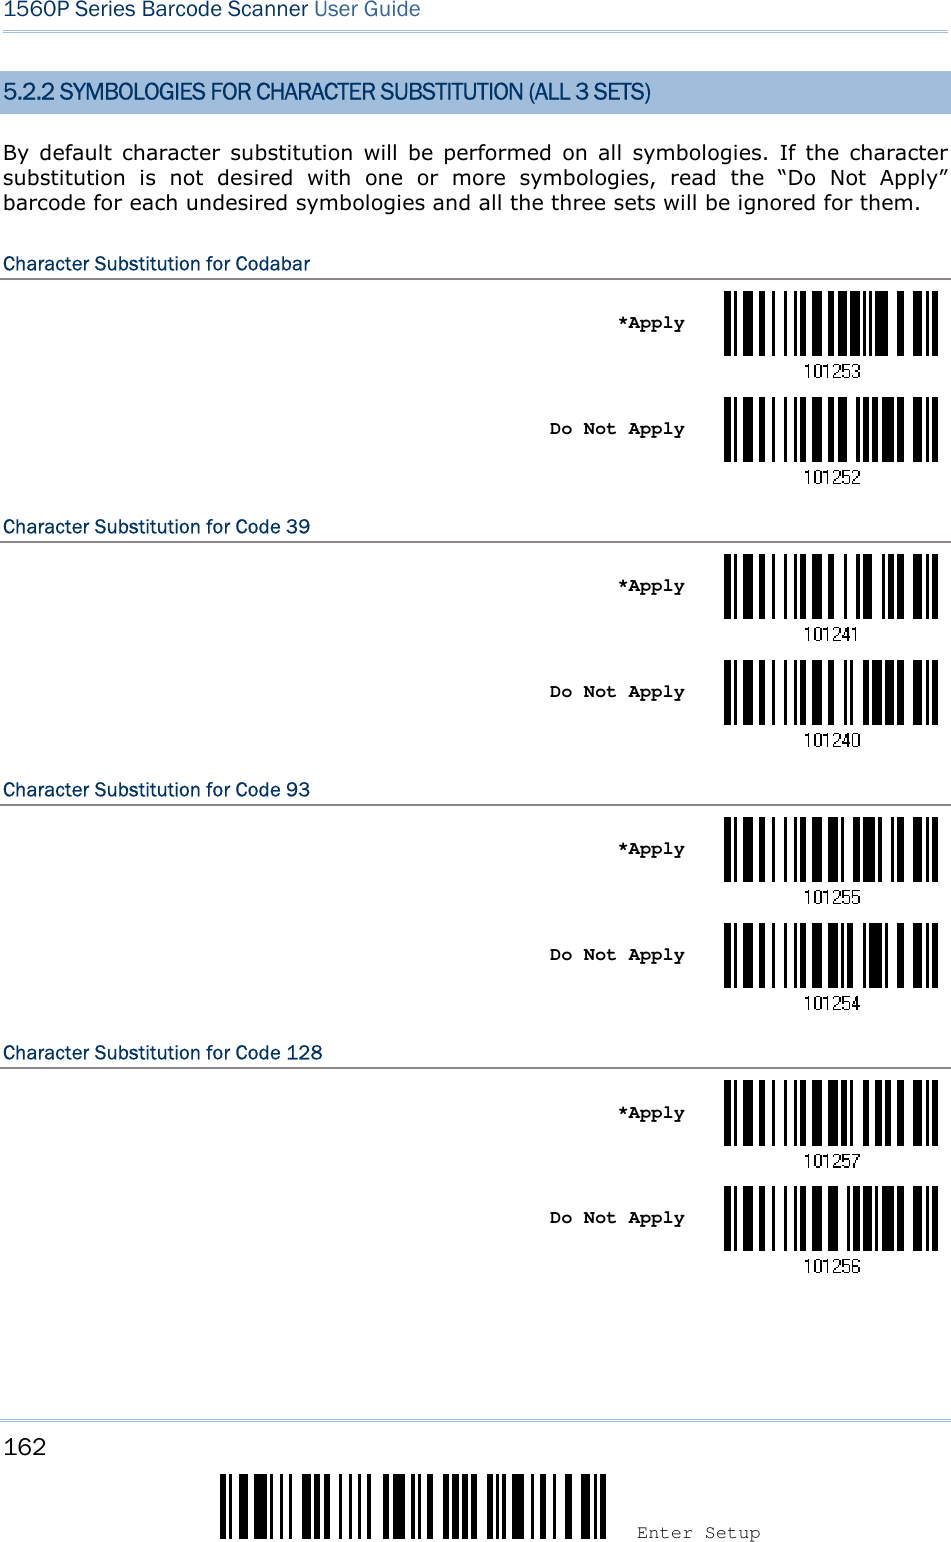 162 Enter Setup 1560P Series Barcode Scanner User Guide 5.2.2 SYMBOLOGIES FOR CHARACTER SUBSTITUTION (ALL 3 SETS) By  default  character  substitution  will  be  performed  on all  symbologies.  If  the  character substitution  is  not  desired  with  one  or  more  symbologies,  read  the  “Do  Not  Apply” barcode for each undesired symbologies and all the three sets will be ignored for them. Character Substitution for Codabar *ApplyDo Not Apply Character Substitution for Code 39 *ApplyDo Not Apply Character Substitution for Code 93 *ApplyDo Not Apply Character Substitution for Code 128 *ApplyDo Not Apply 